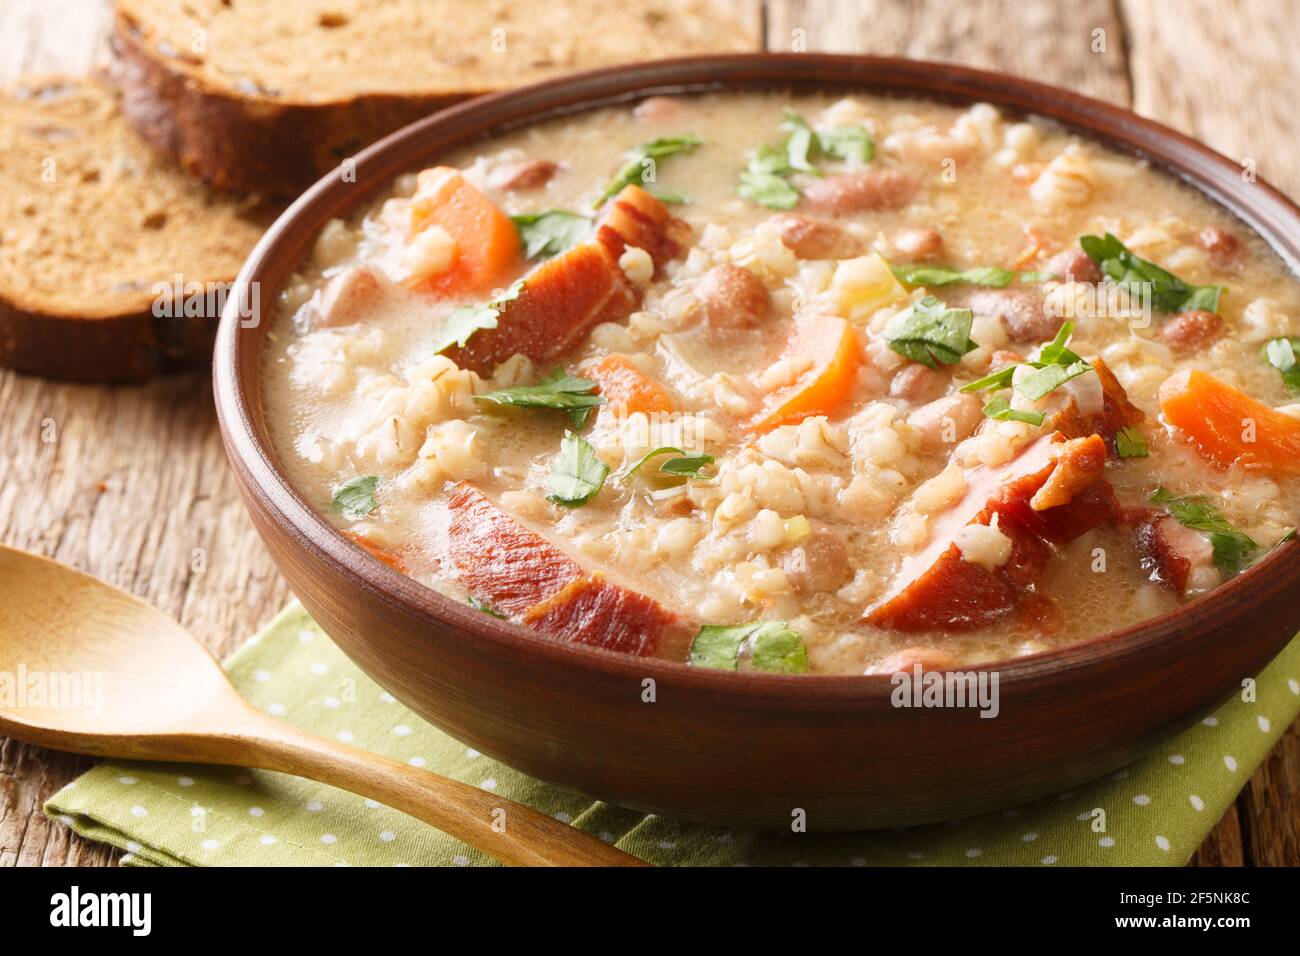 Homemade Ricet barley and bean soup with smoked meat and vegetables close-up in a bowl on the table. horizontal Stock Photo